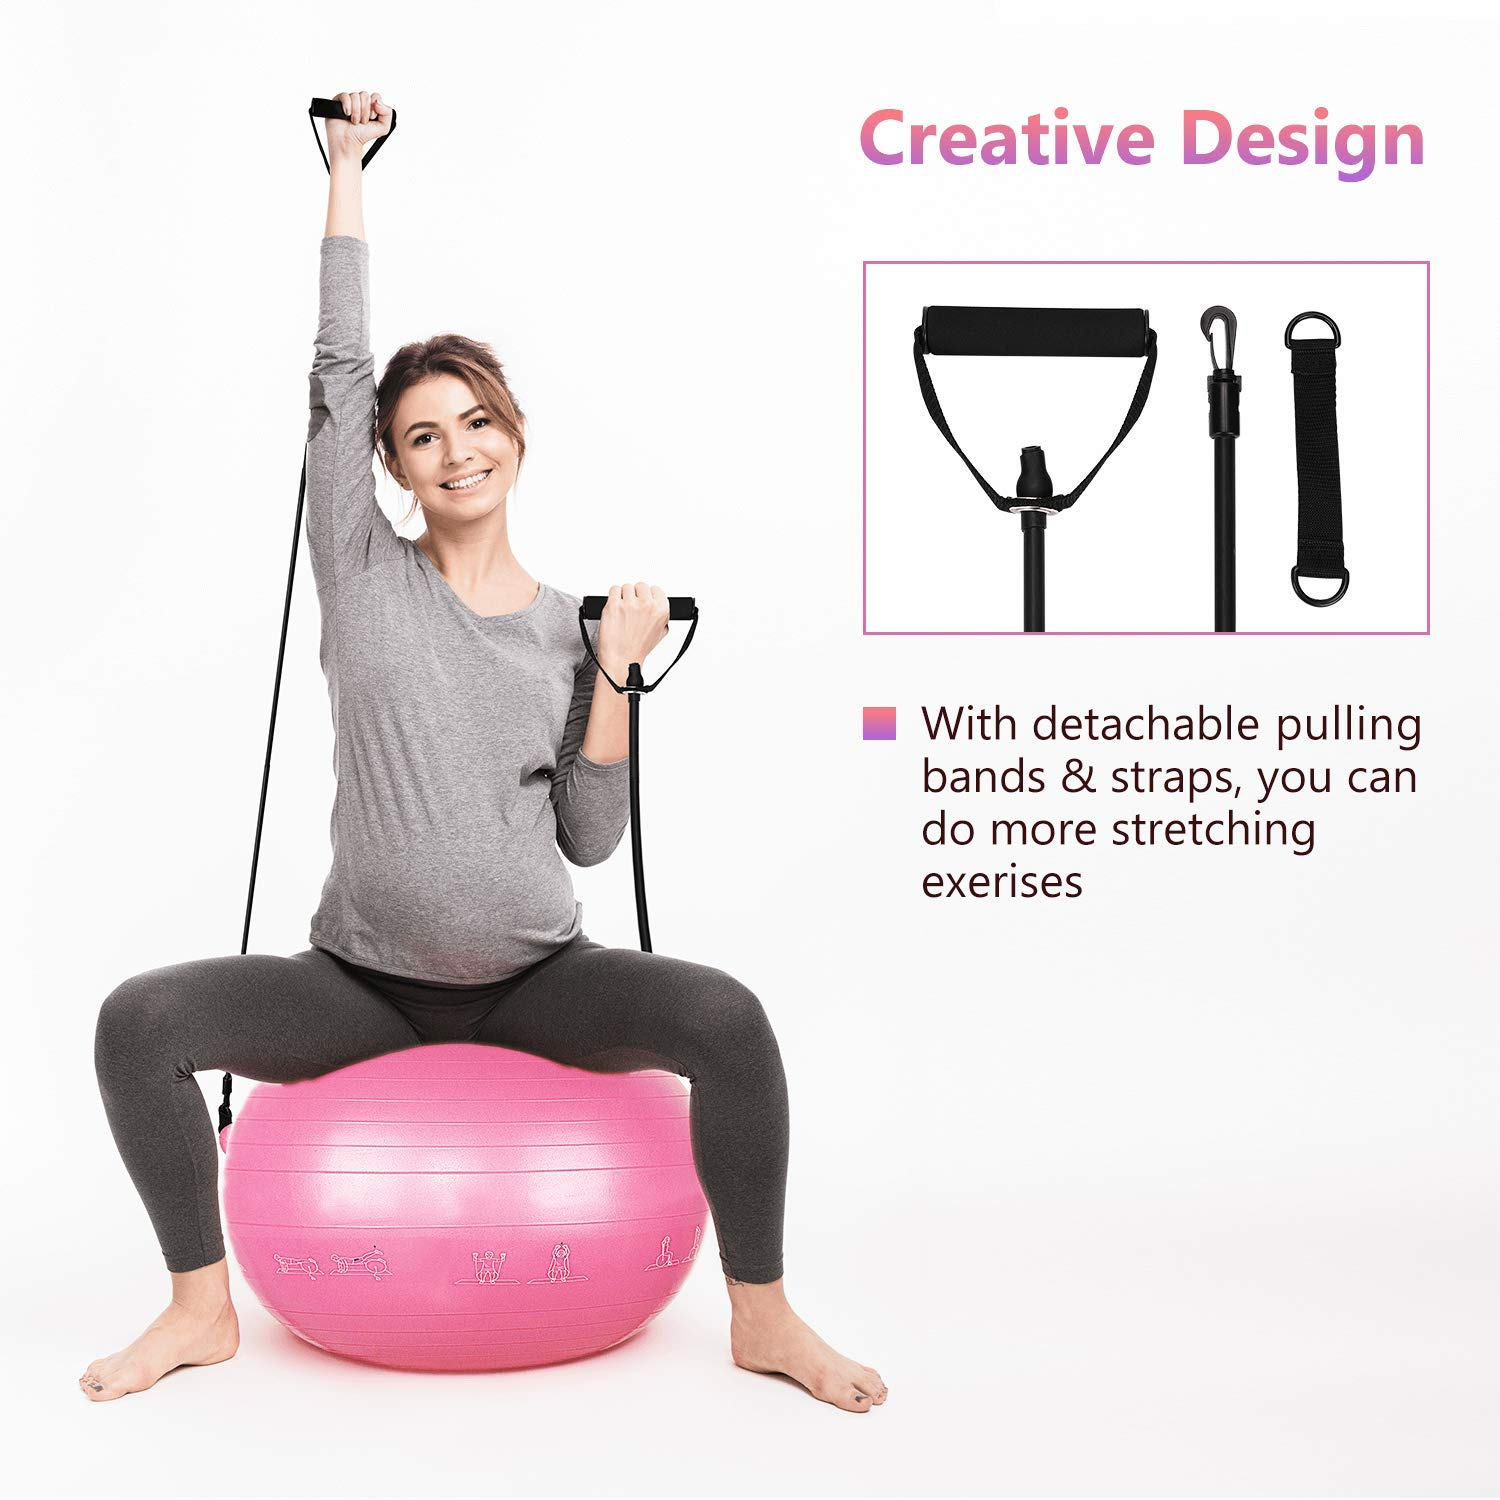 Oziral Stability Exercise Ball 55cm Yoga Balance Ball Extra Thick Ball Chair Fitness Yoga Pilates Anti-Slip Birthing Ball with Air Pump Office&Home&Gym 